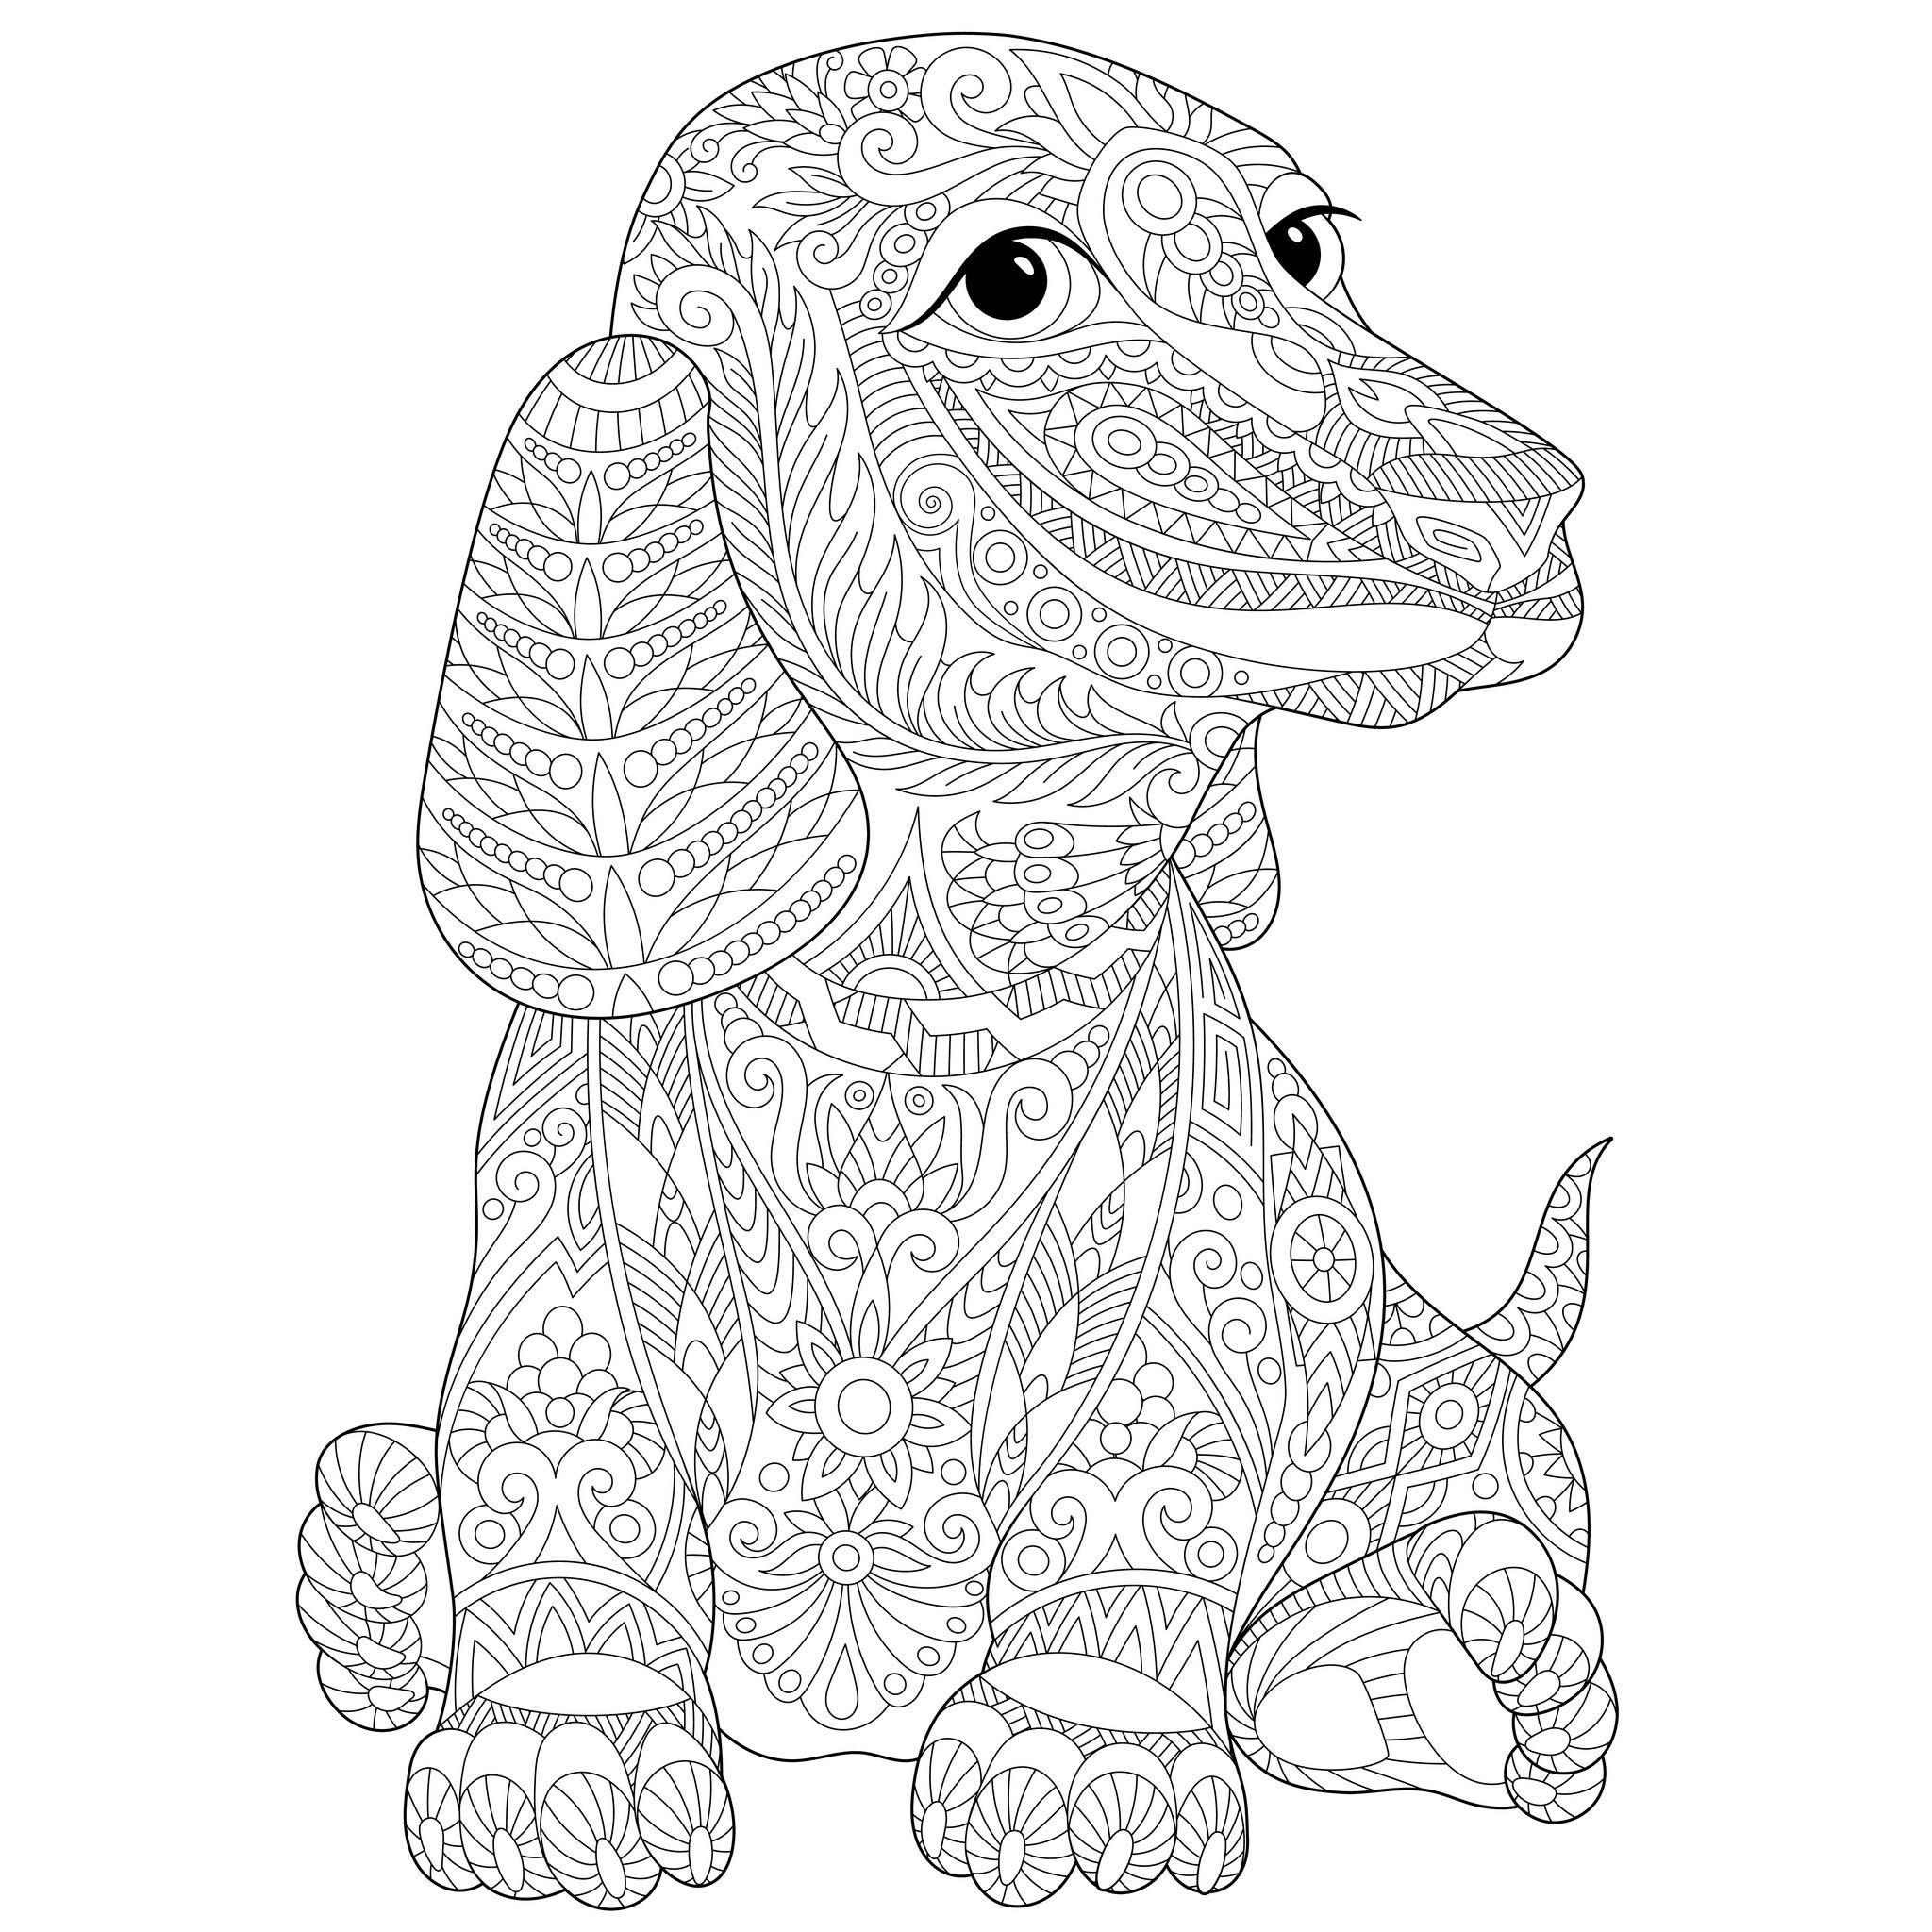 Dog to color for kids - Dogs Kids Coloring Pages